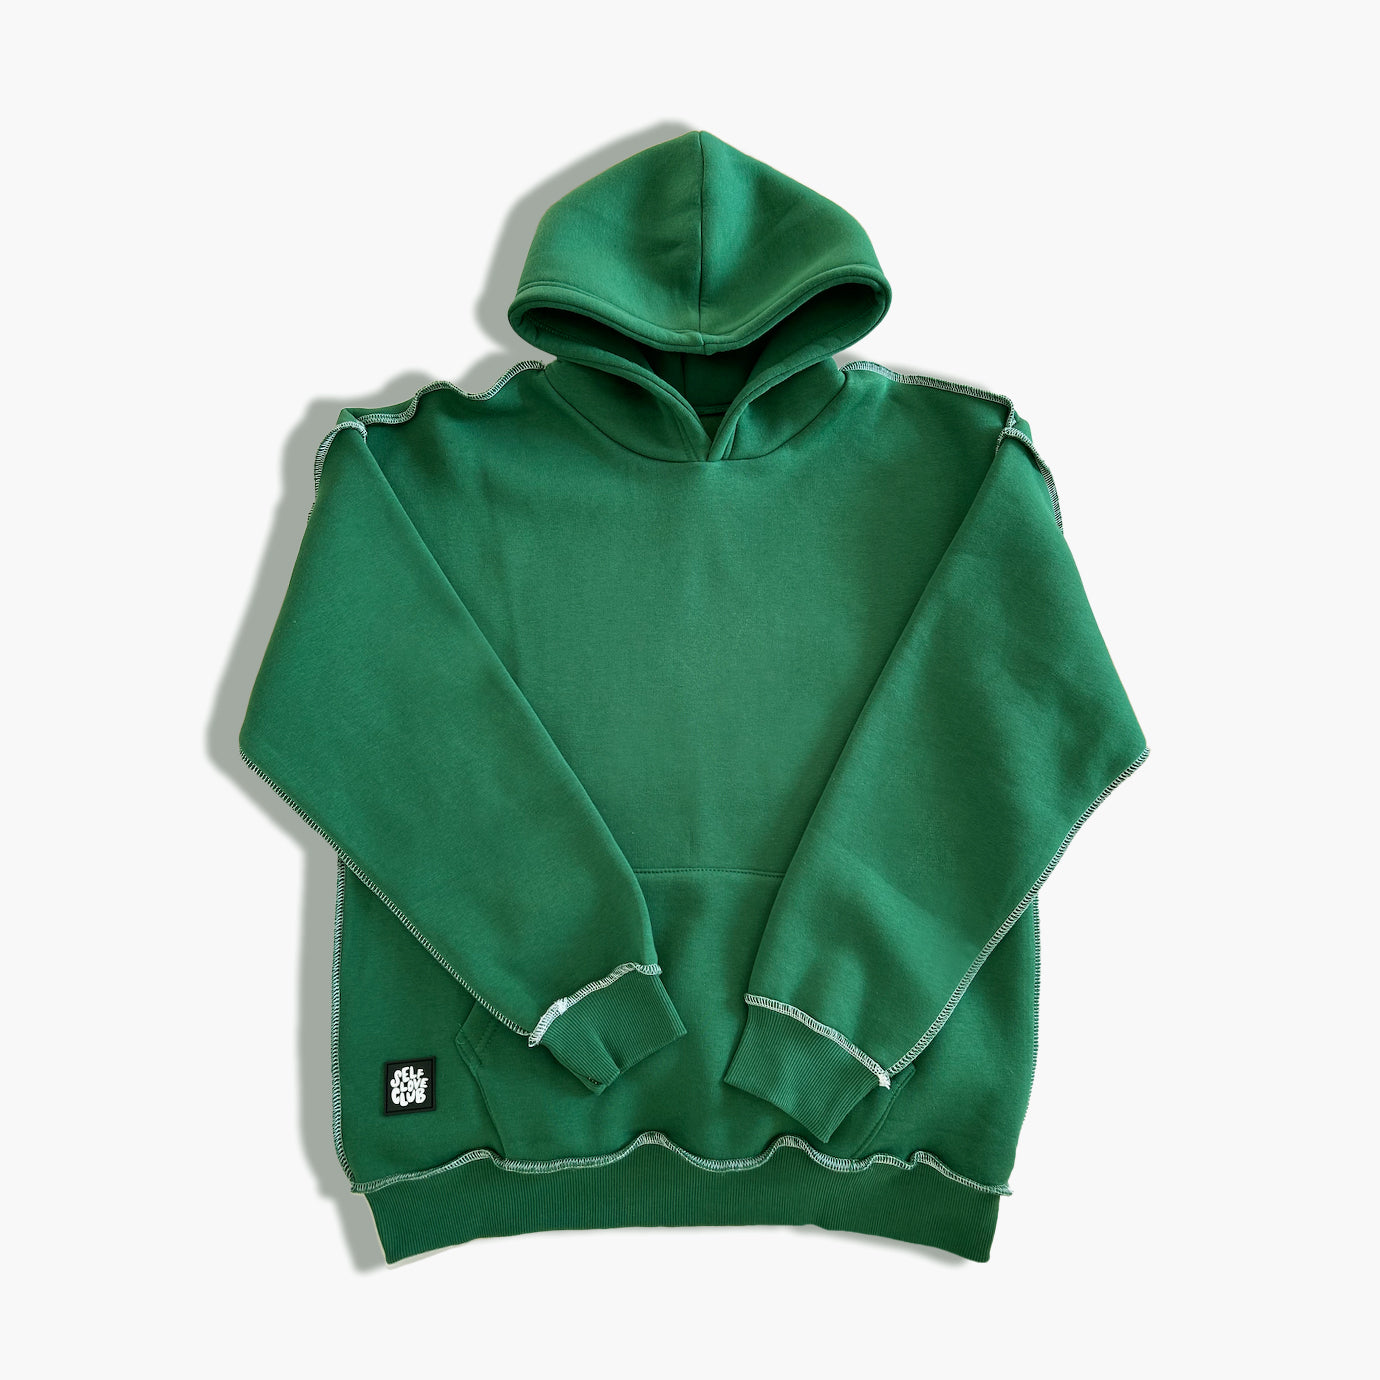 I should have stayed home. Hoodie